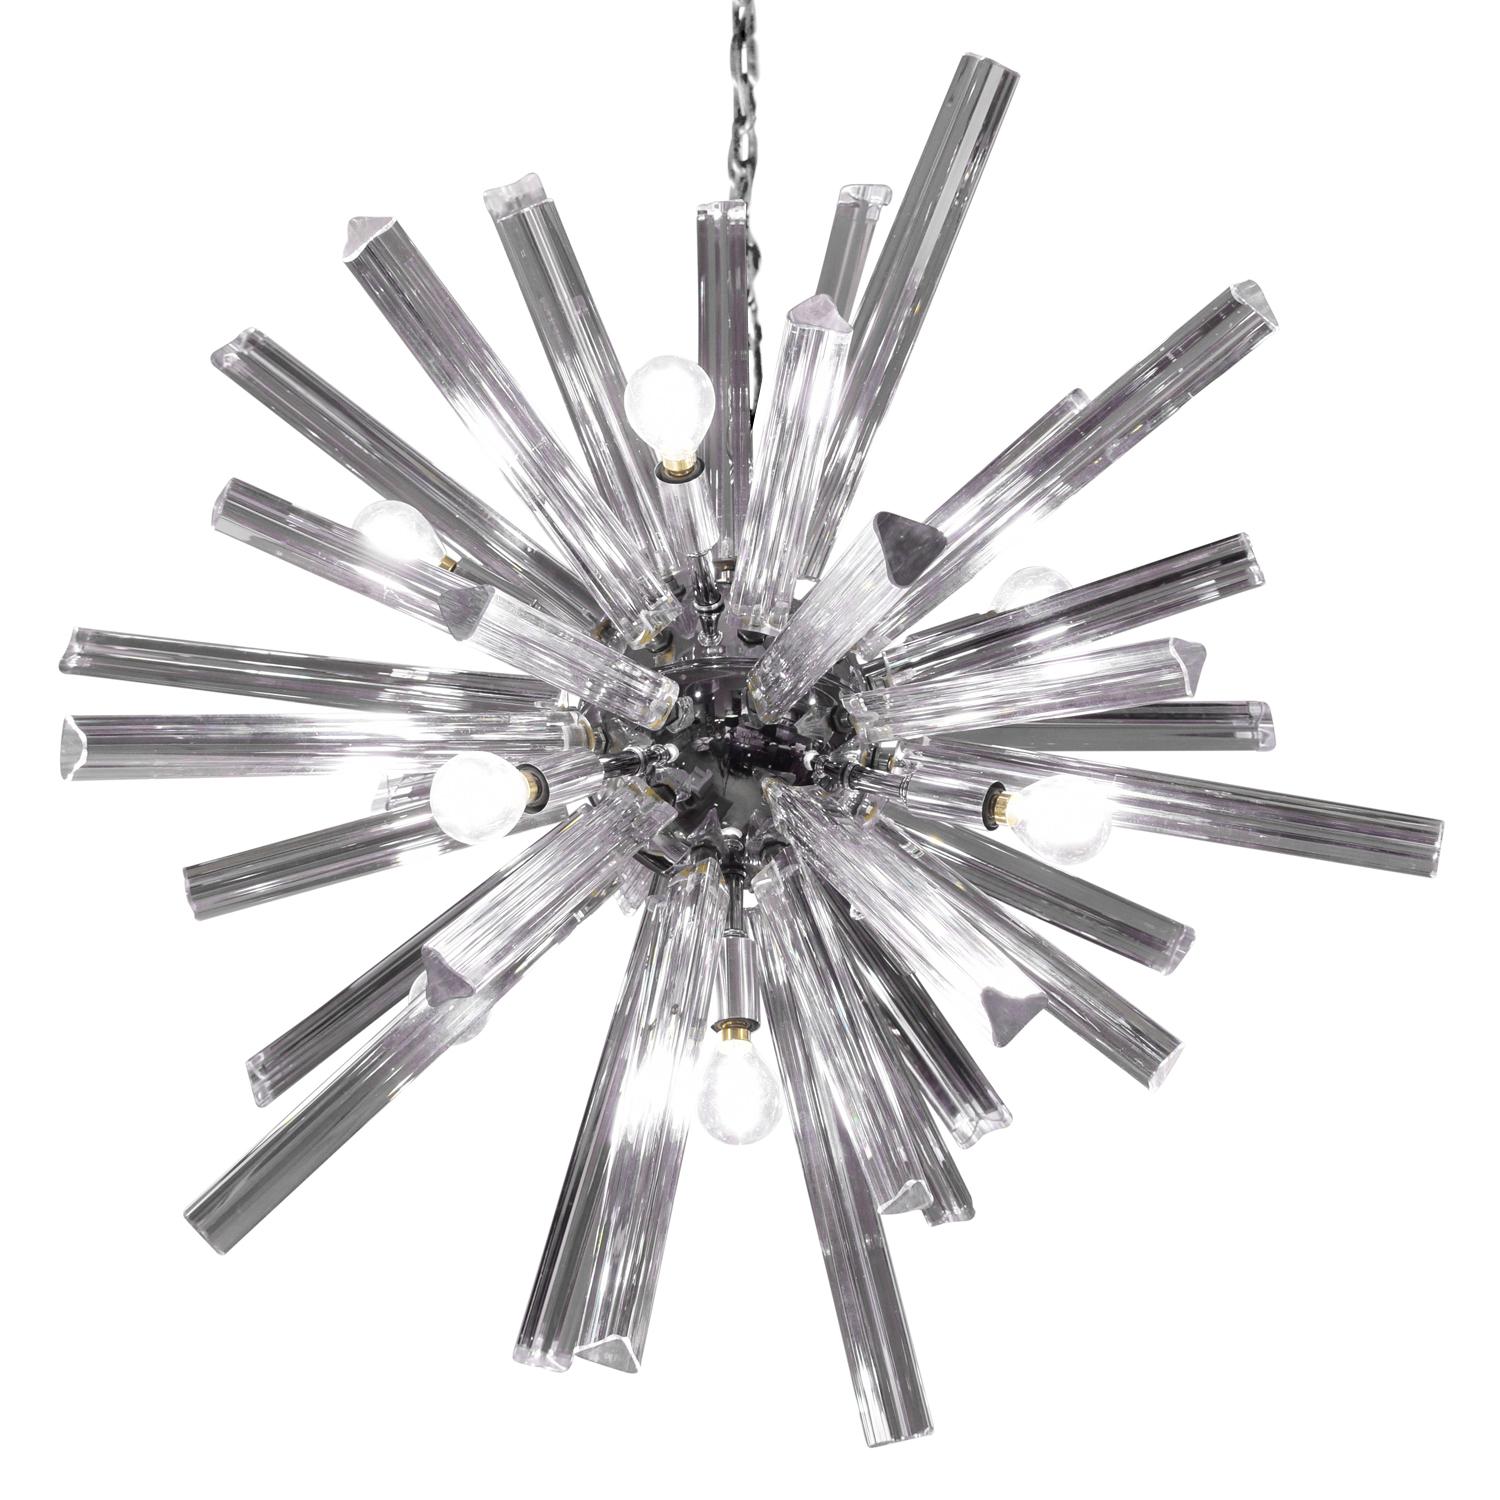 Modern Sputnik Style Venini Chandelier in Chrome with Glass Rods, 1970s For Sale